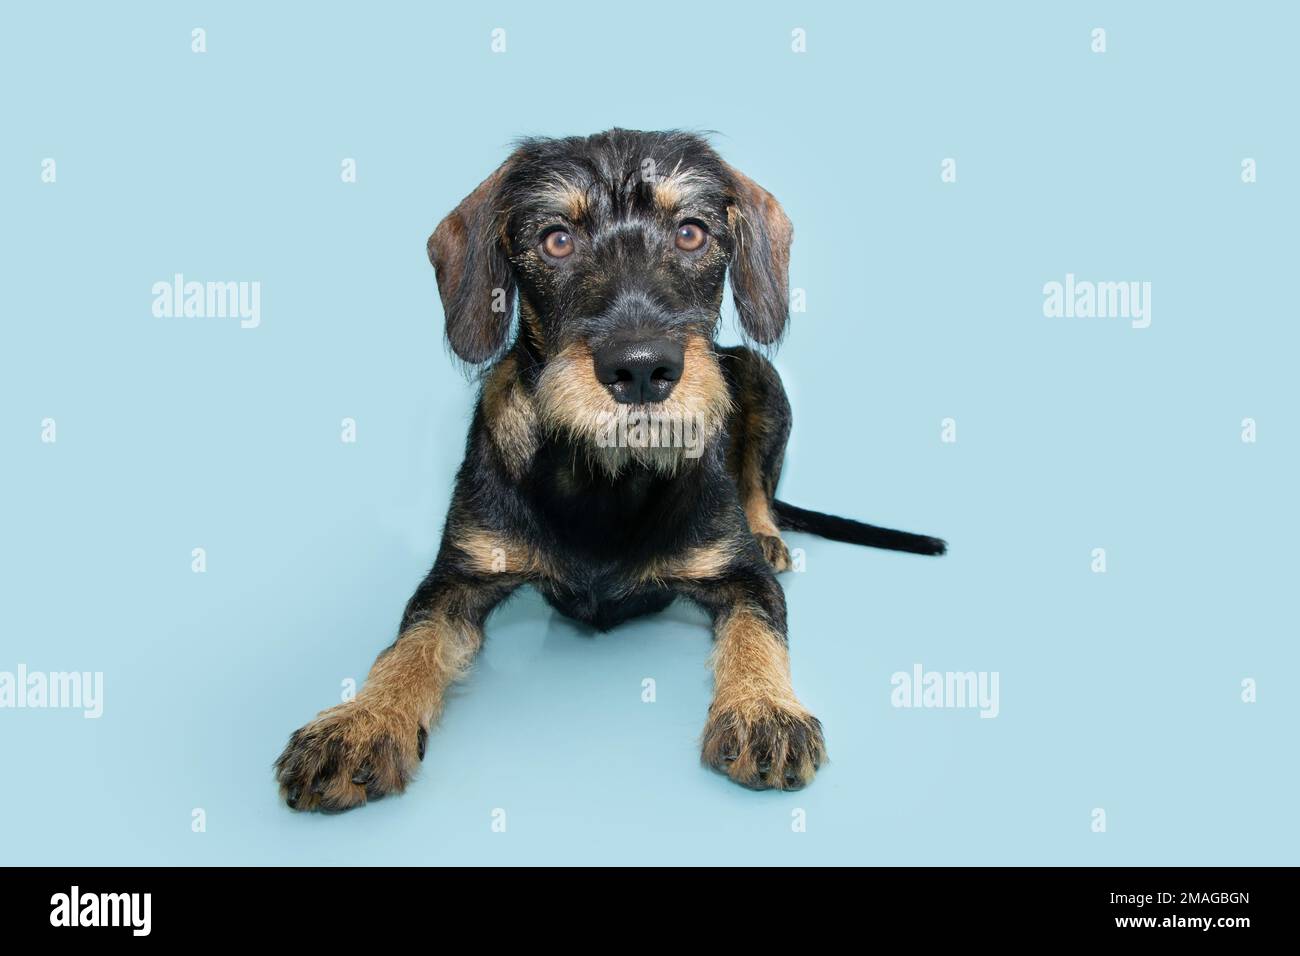 Portrait young puppy Dachshund dog lying down looking at camera. Isolated on blue pastel background Stock Photo